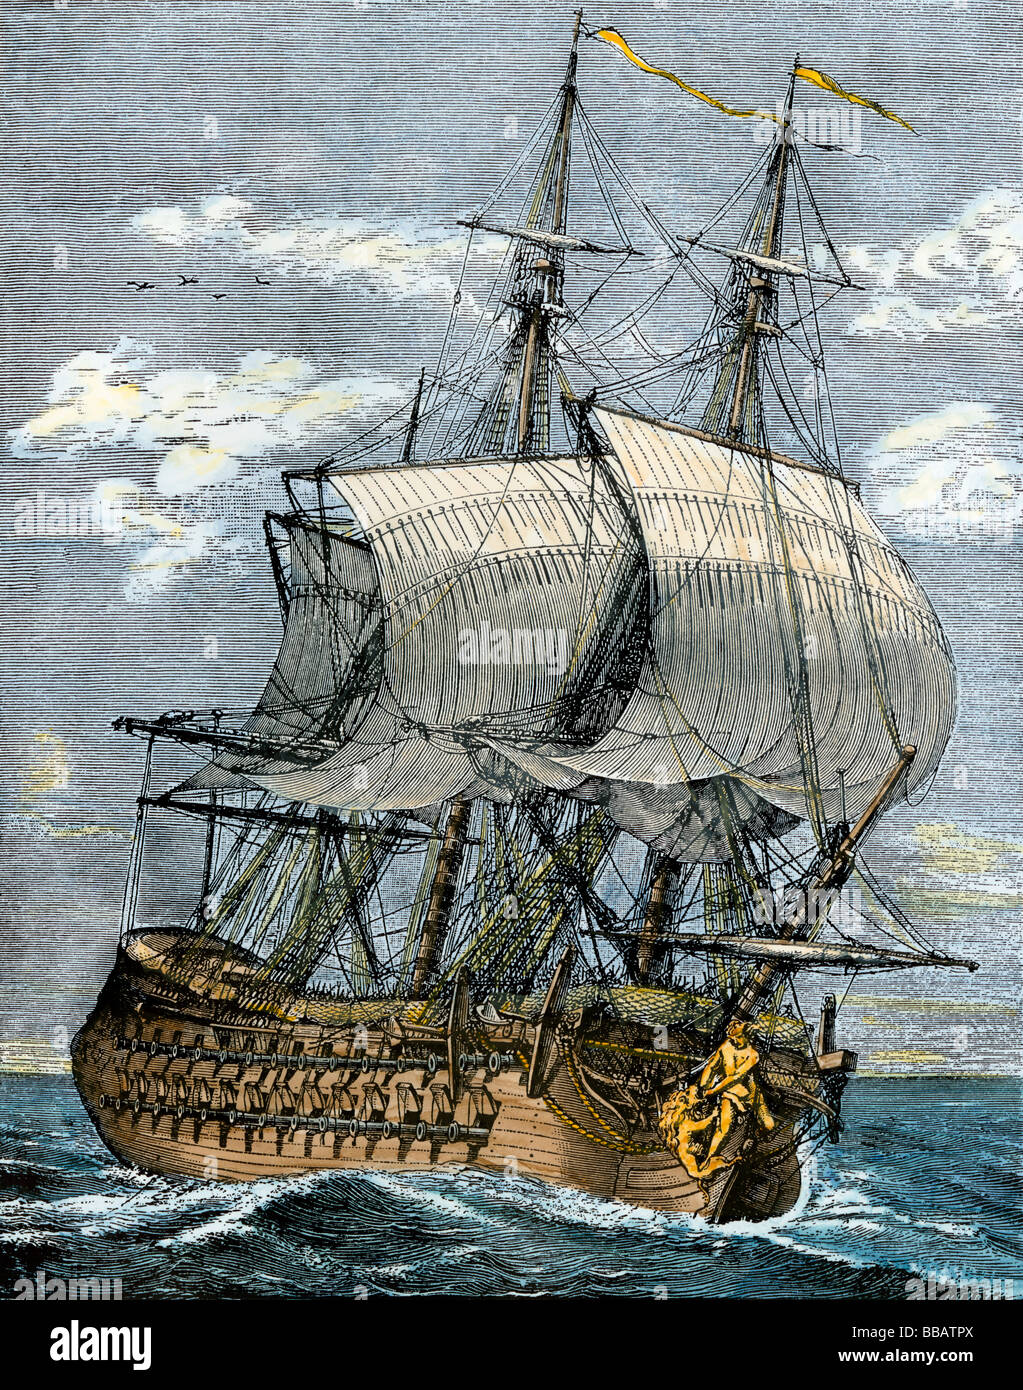 Armed French frigate of the 18th century. Hand-colored woodcut Stock Photo